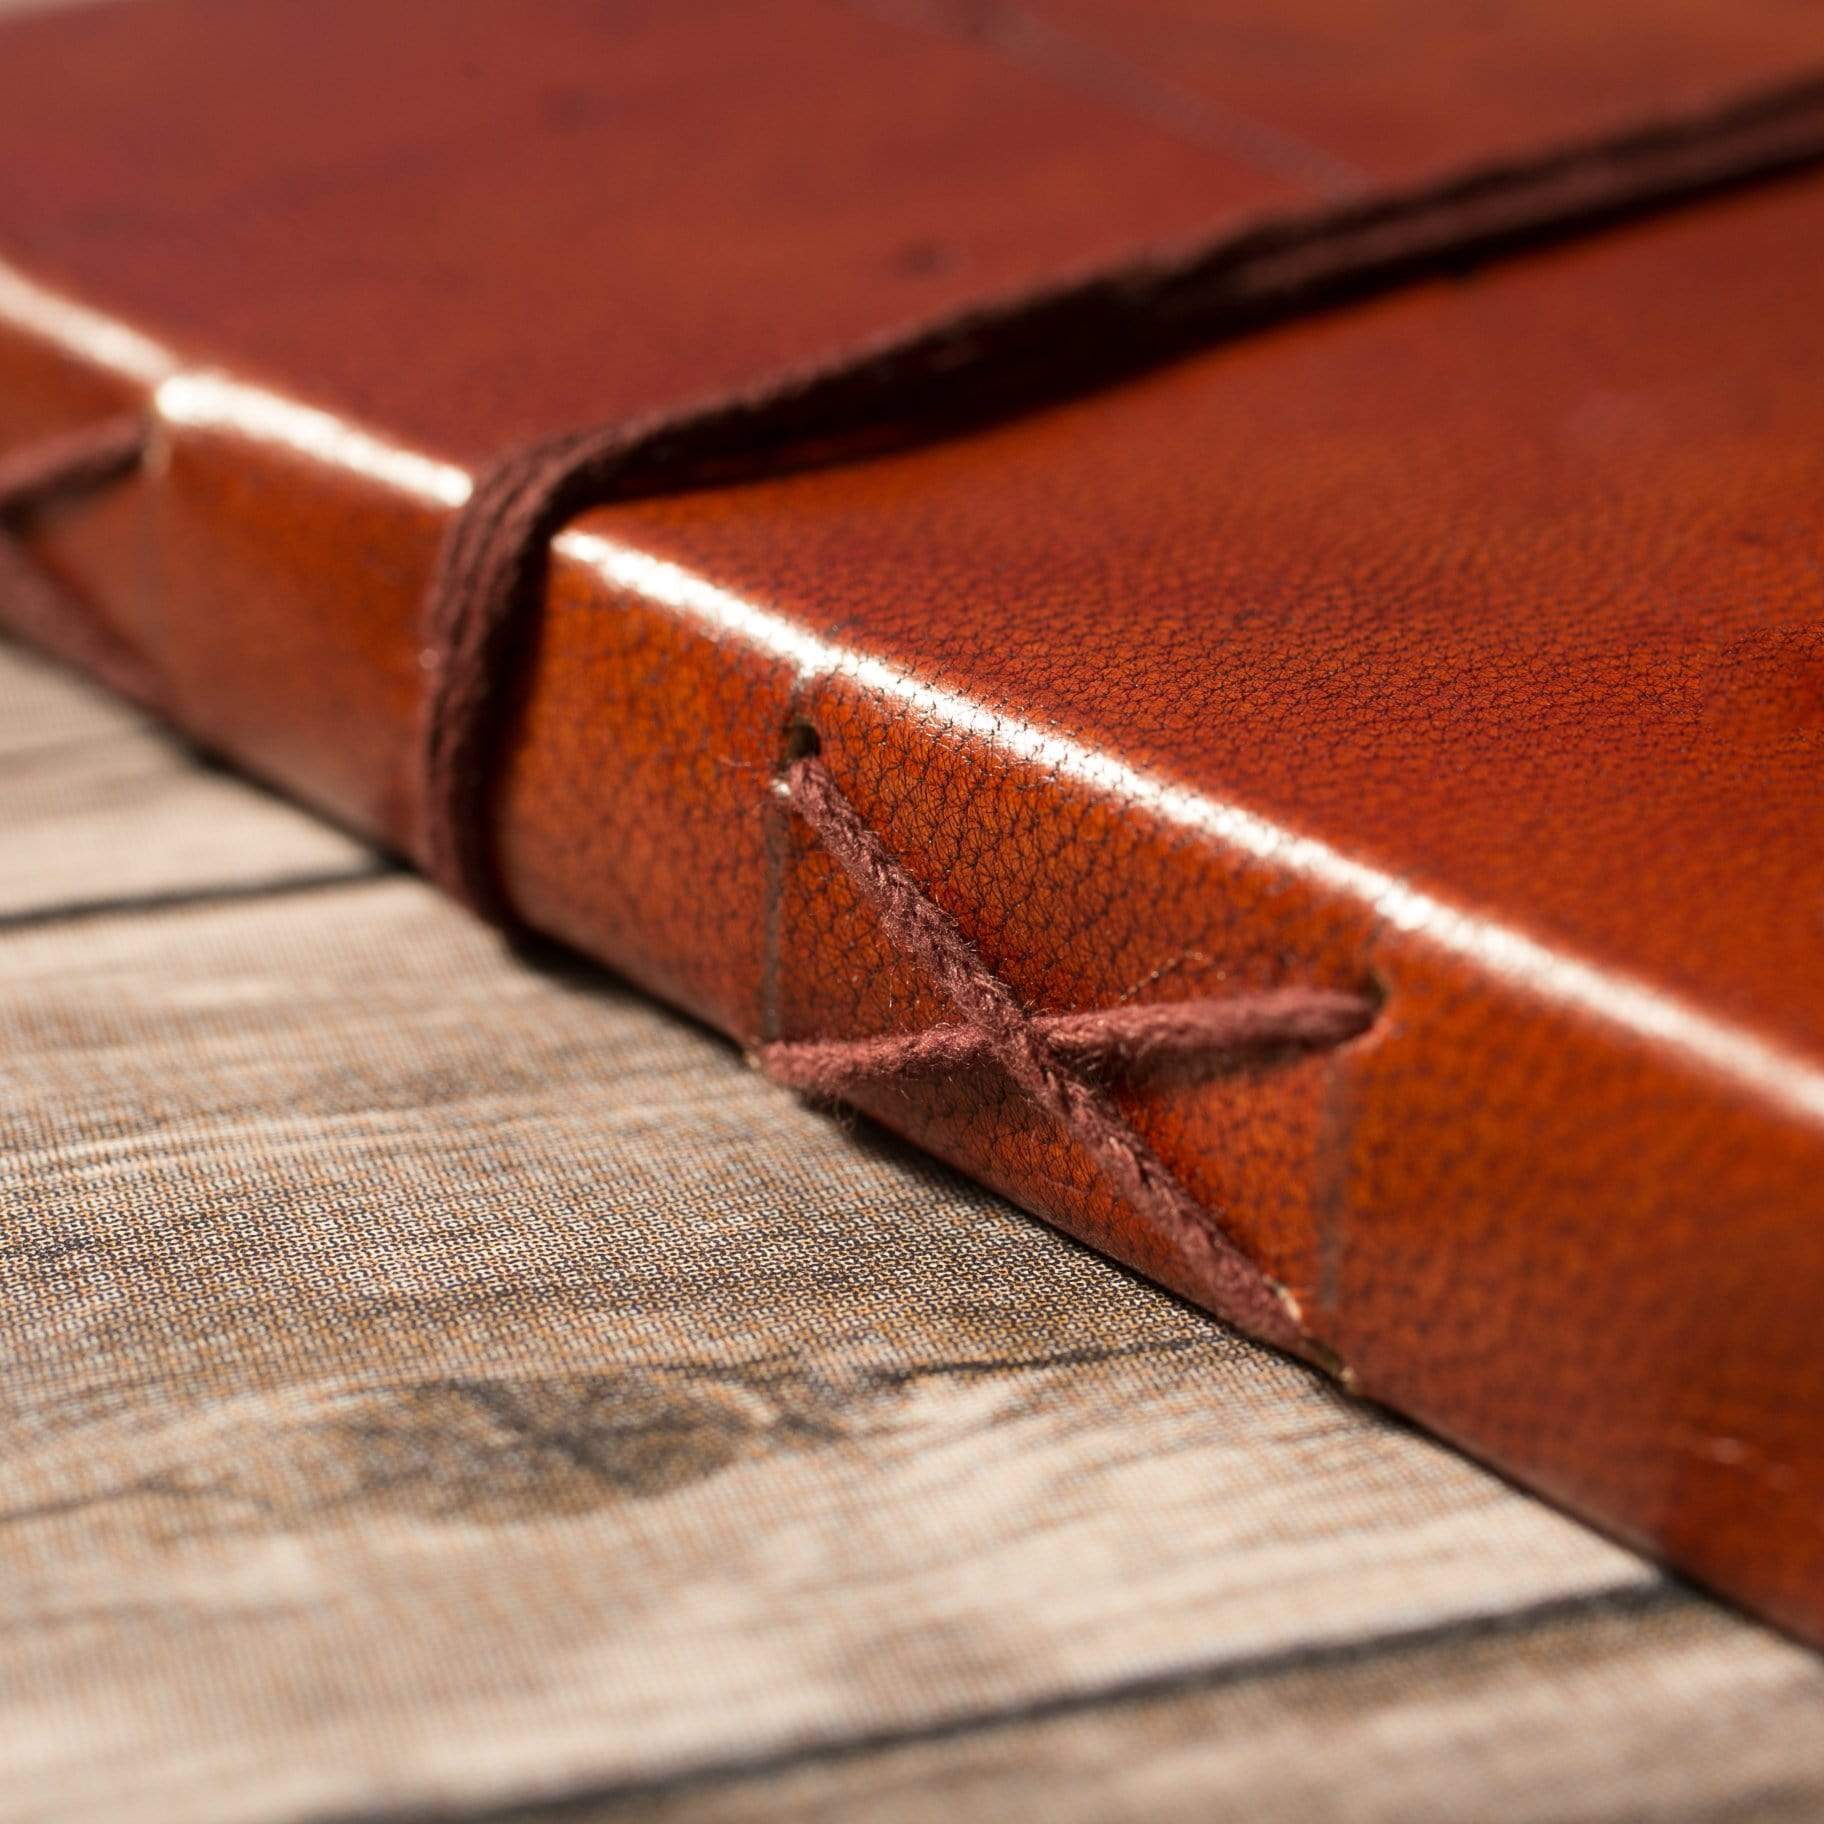 "Wonderful Nothings" Jane Austen Handcrafted Leather Embossed Journal - Leather Journals By Soothi